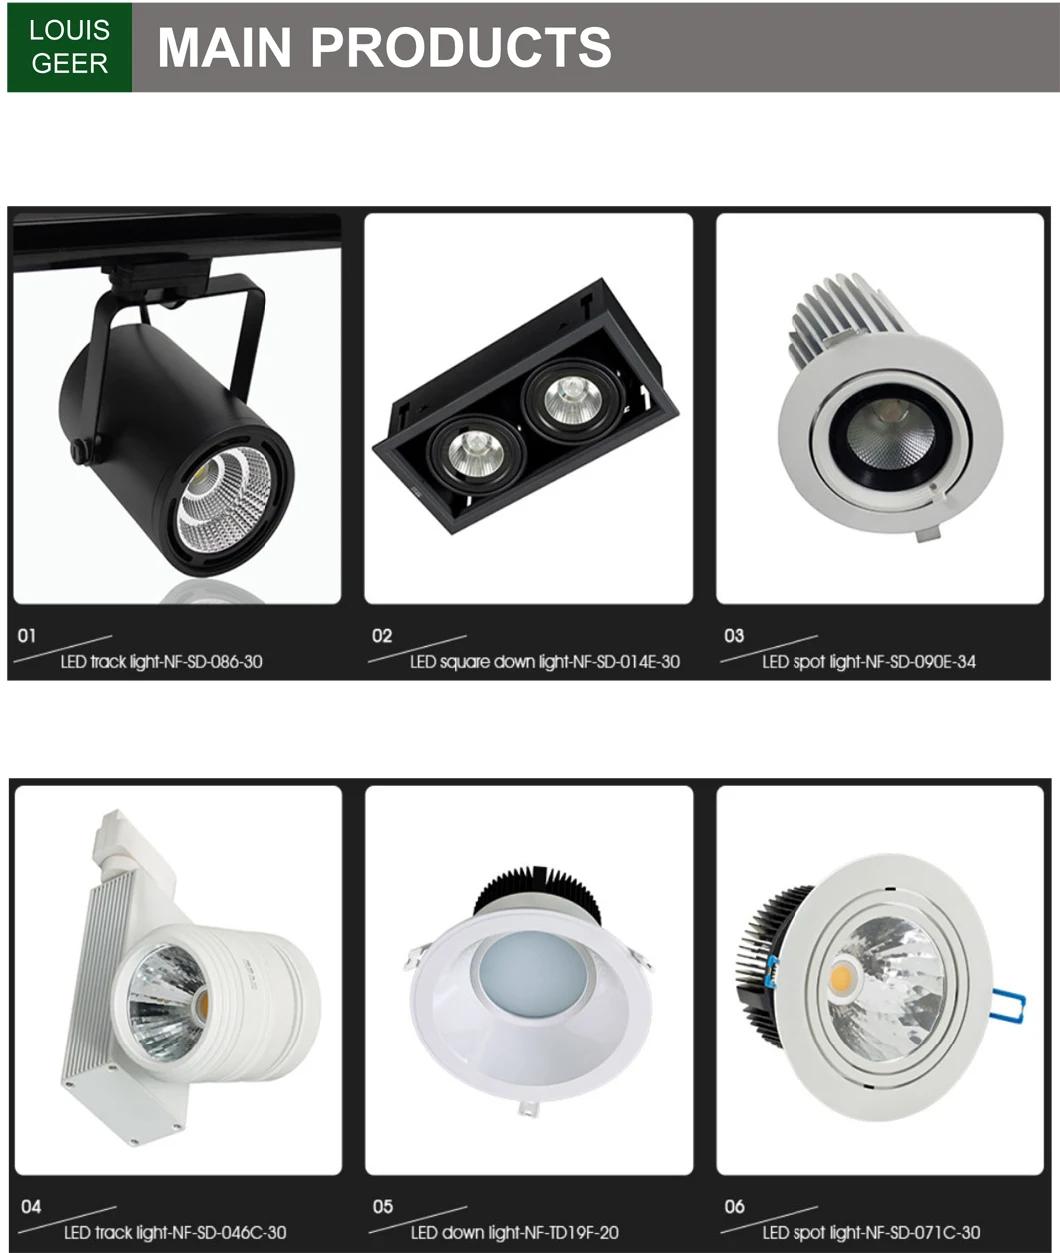 12W 15W Hot Selling LED Spot Light with Hoenycomb Cut out 140mm Glare Free Recessed COB Downlight